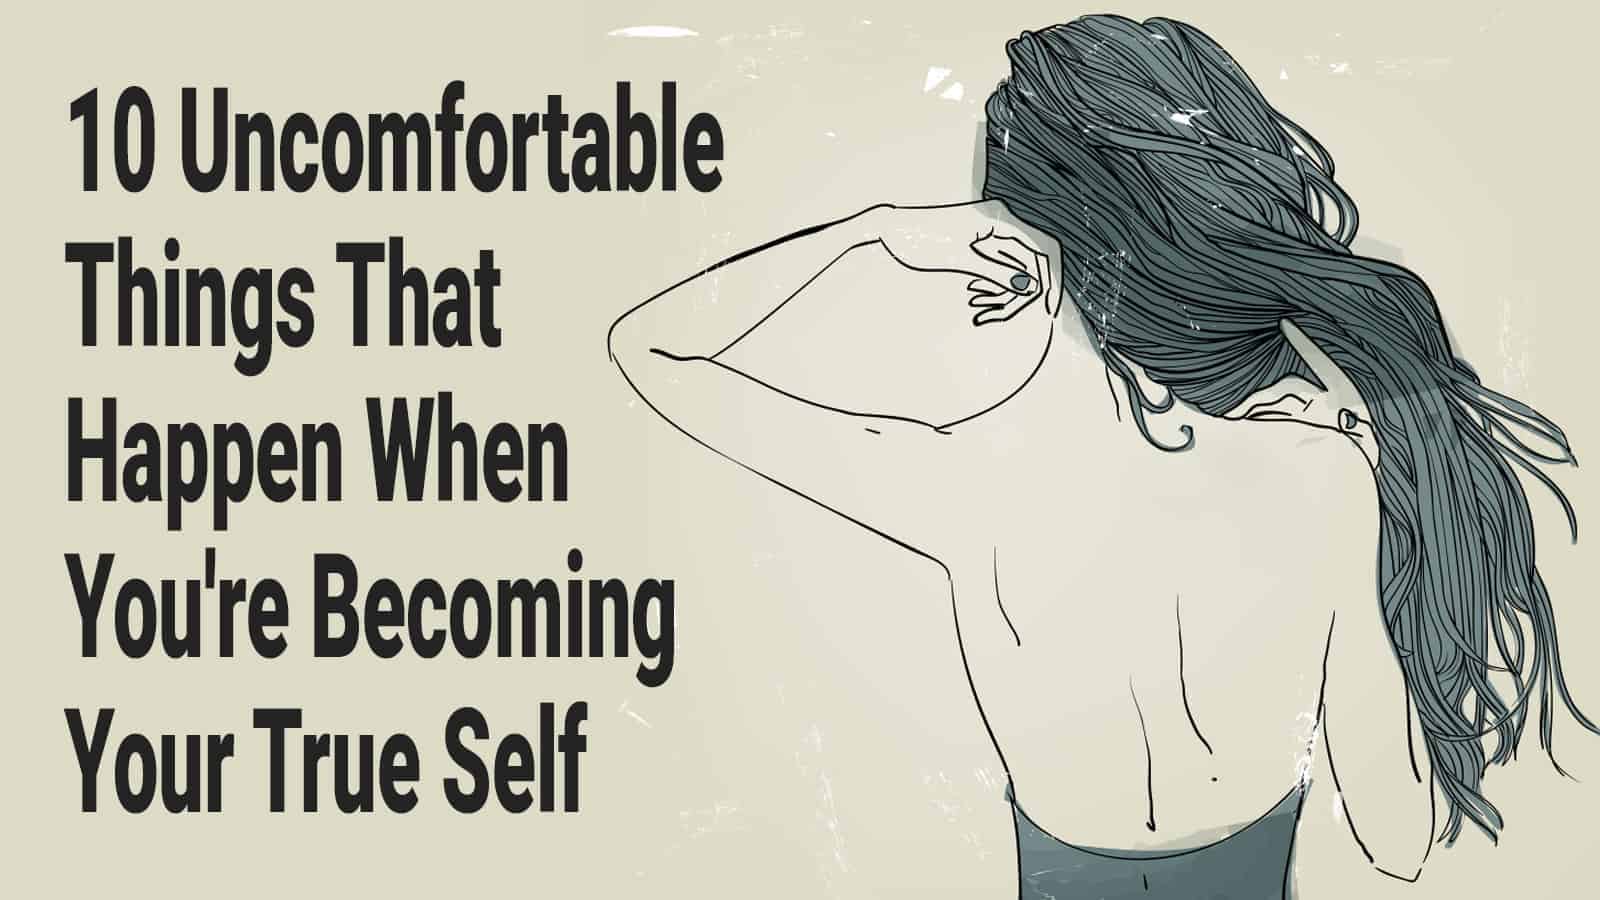 10 Uncomfortable Things That Happen When You’re Becoming Your True Self